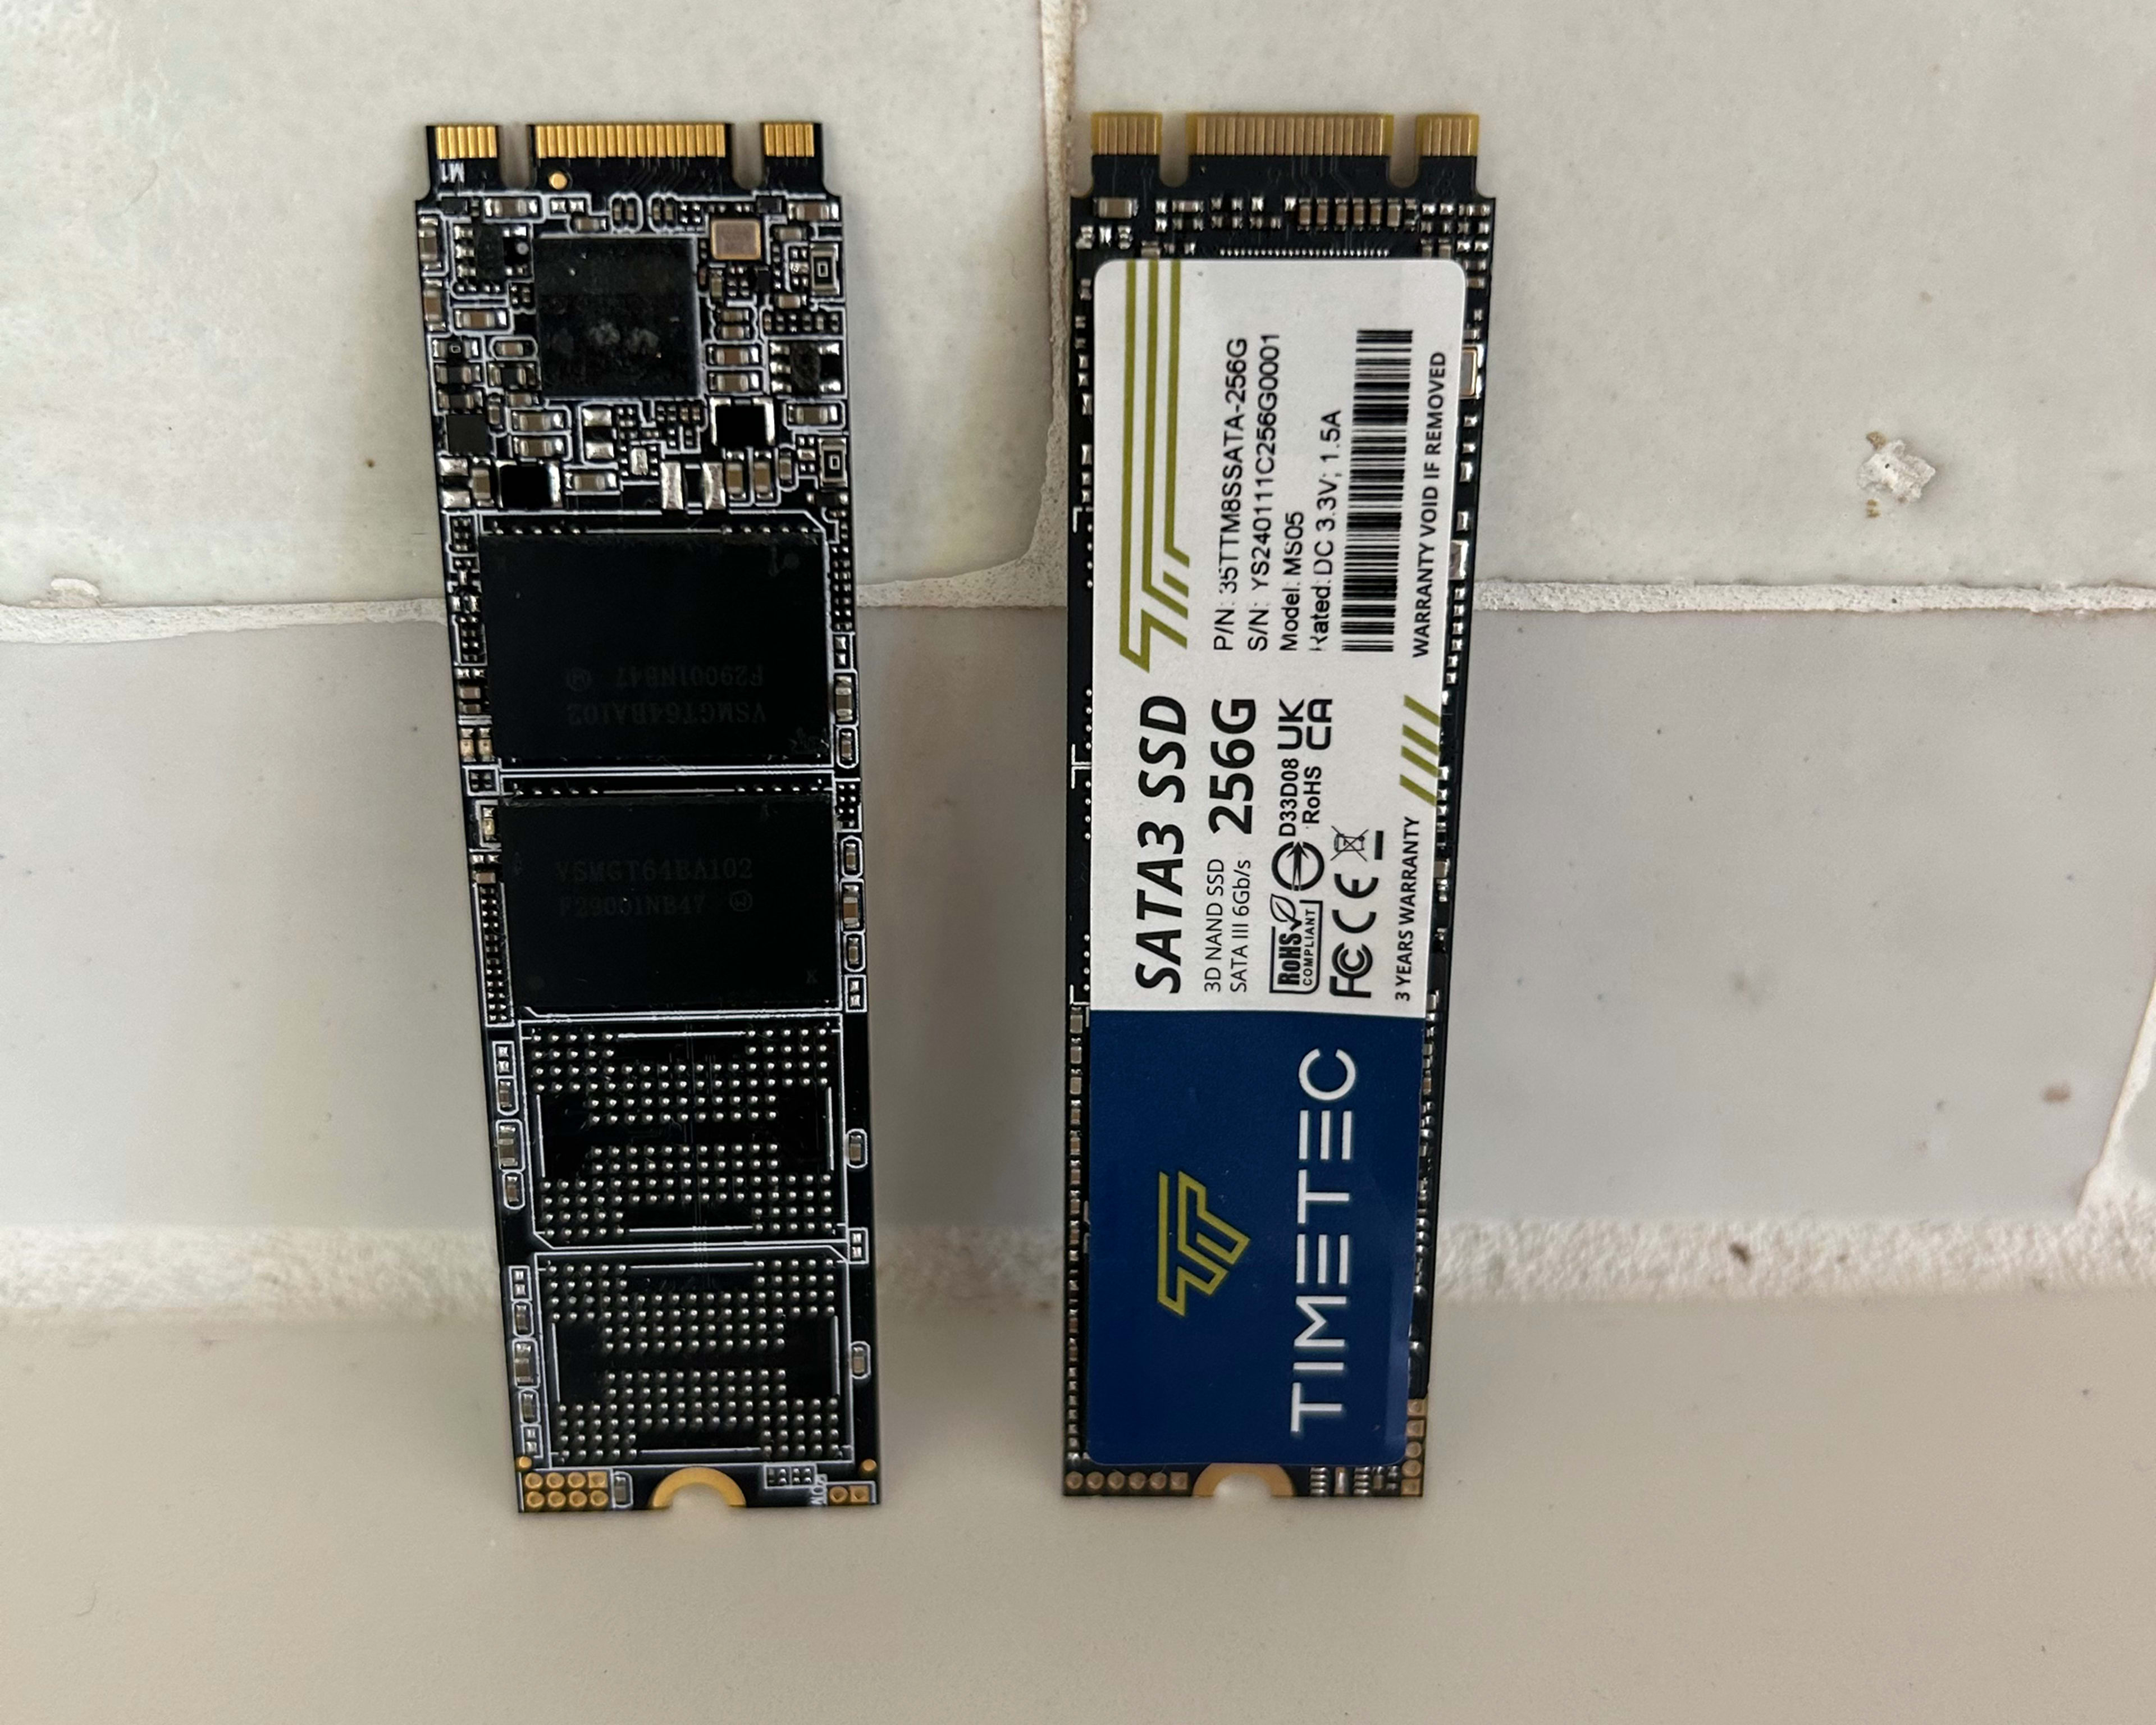 Two 256GB M.2 SSD's